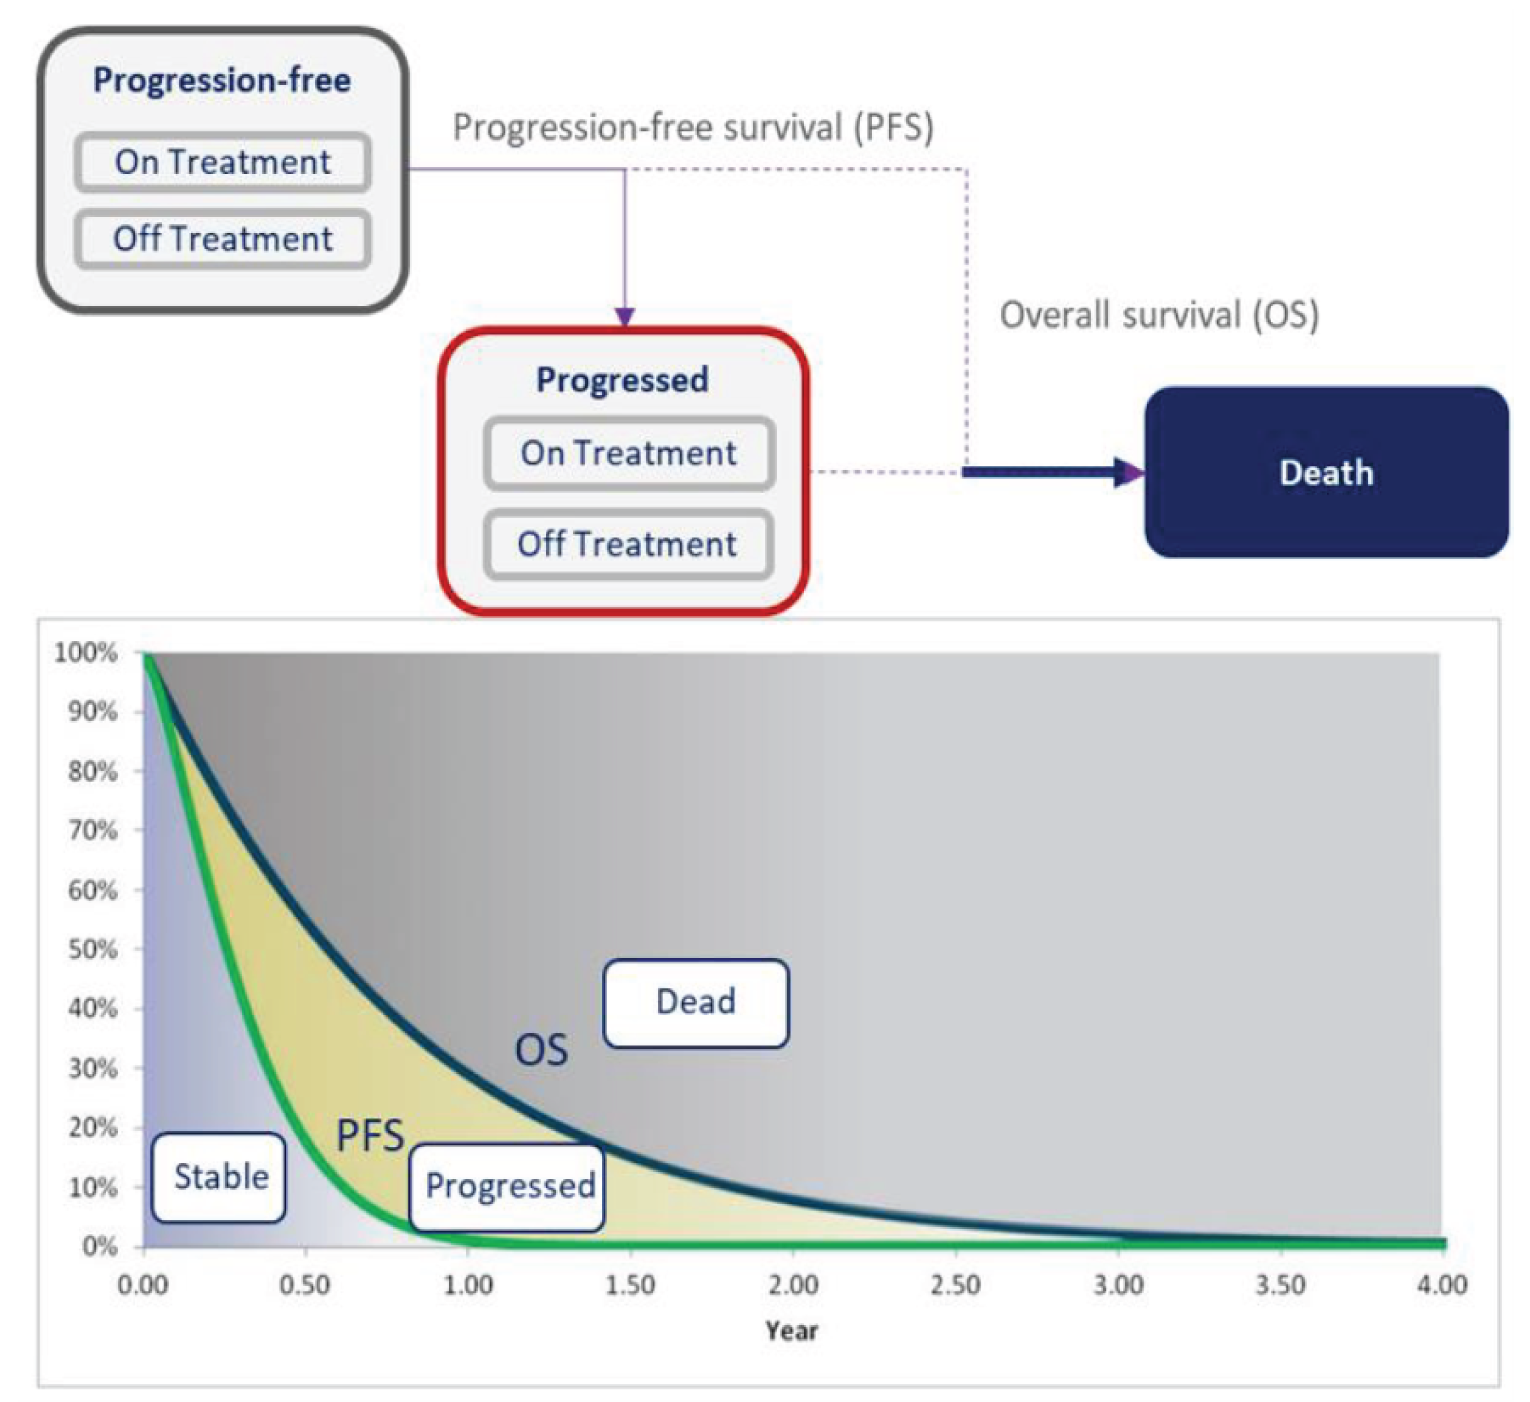 The flow chart is a diagrammatic representation of how the sponsor’s partition survival model is structured. This outlines how patients are simulated in the sponsor’s model. The graph beneath the flowchart represents the proportion of patients that are ‘stable’, ‘progressed’ or ‘dead’ at any given timepoint within the model.